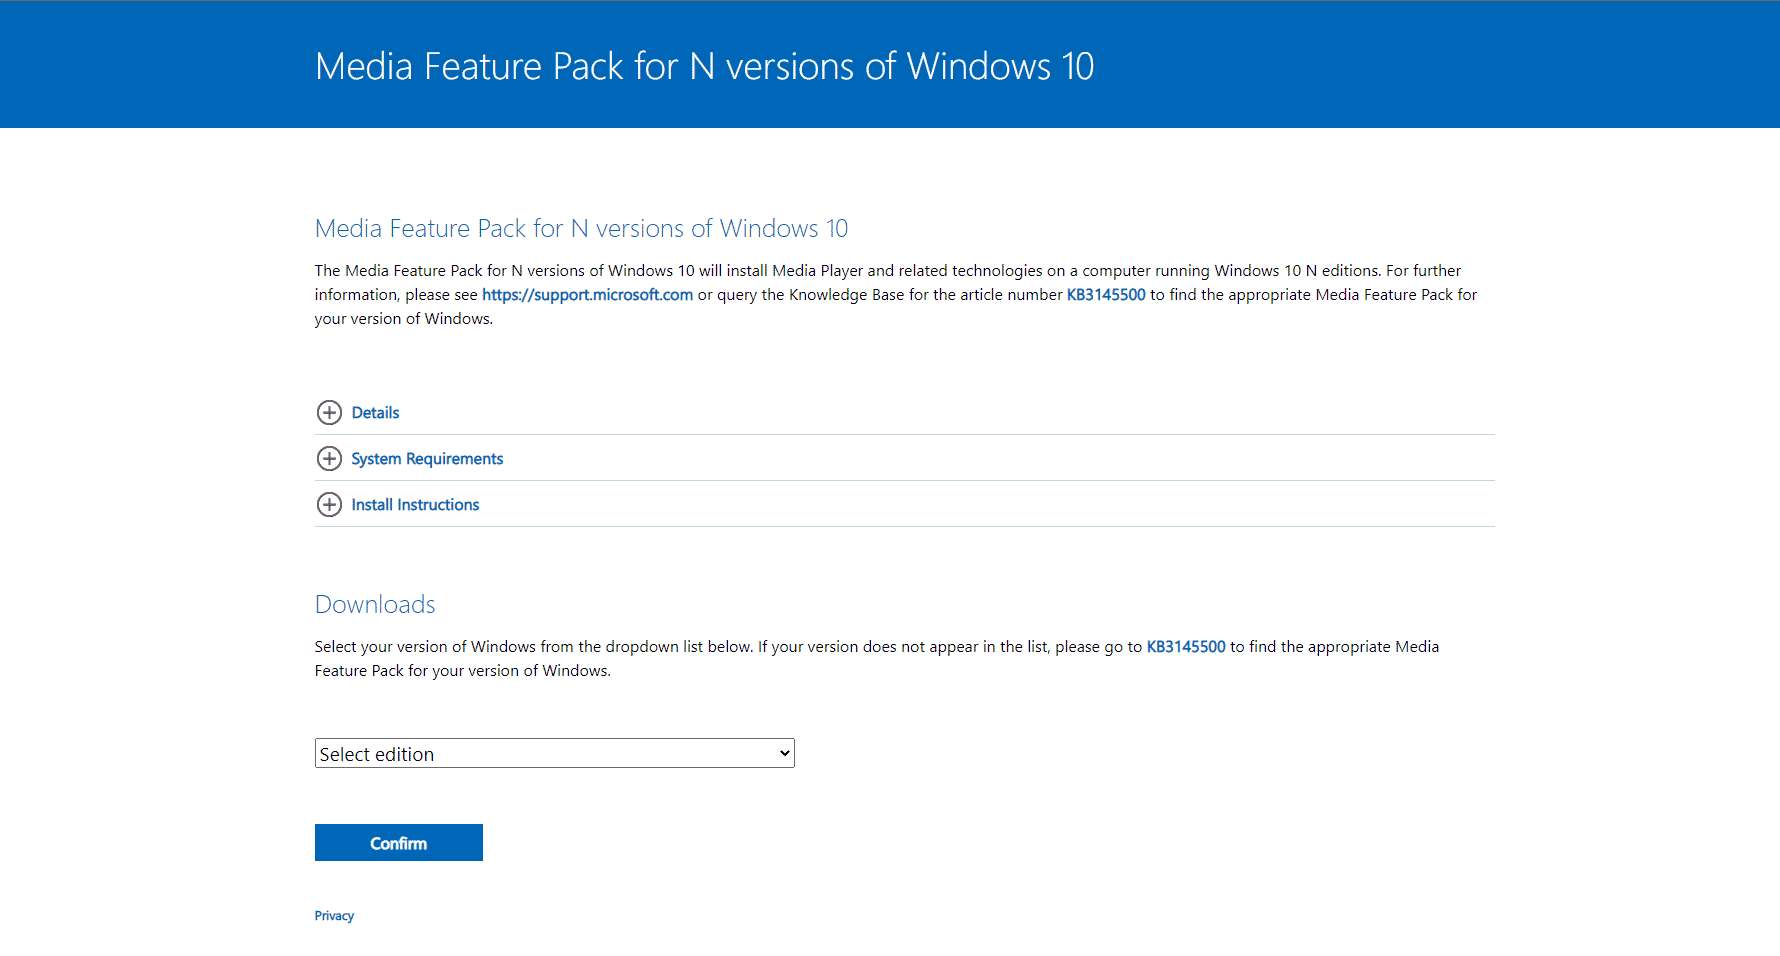 Windows Media Feature Pack download page. Fix Android phone USB connection problem